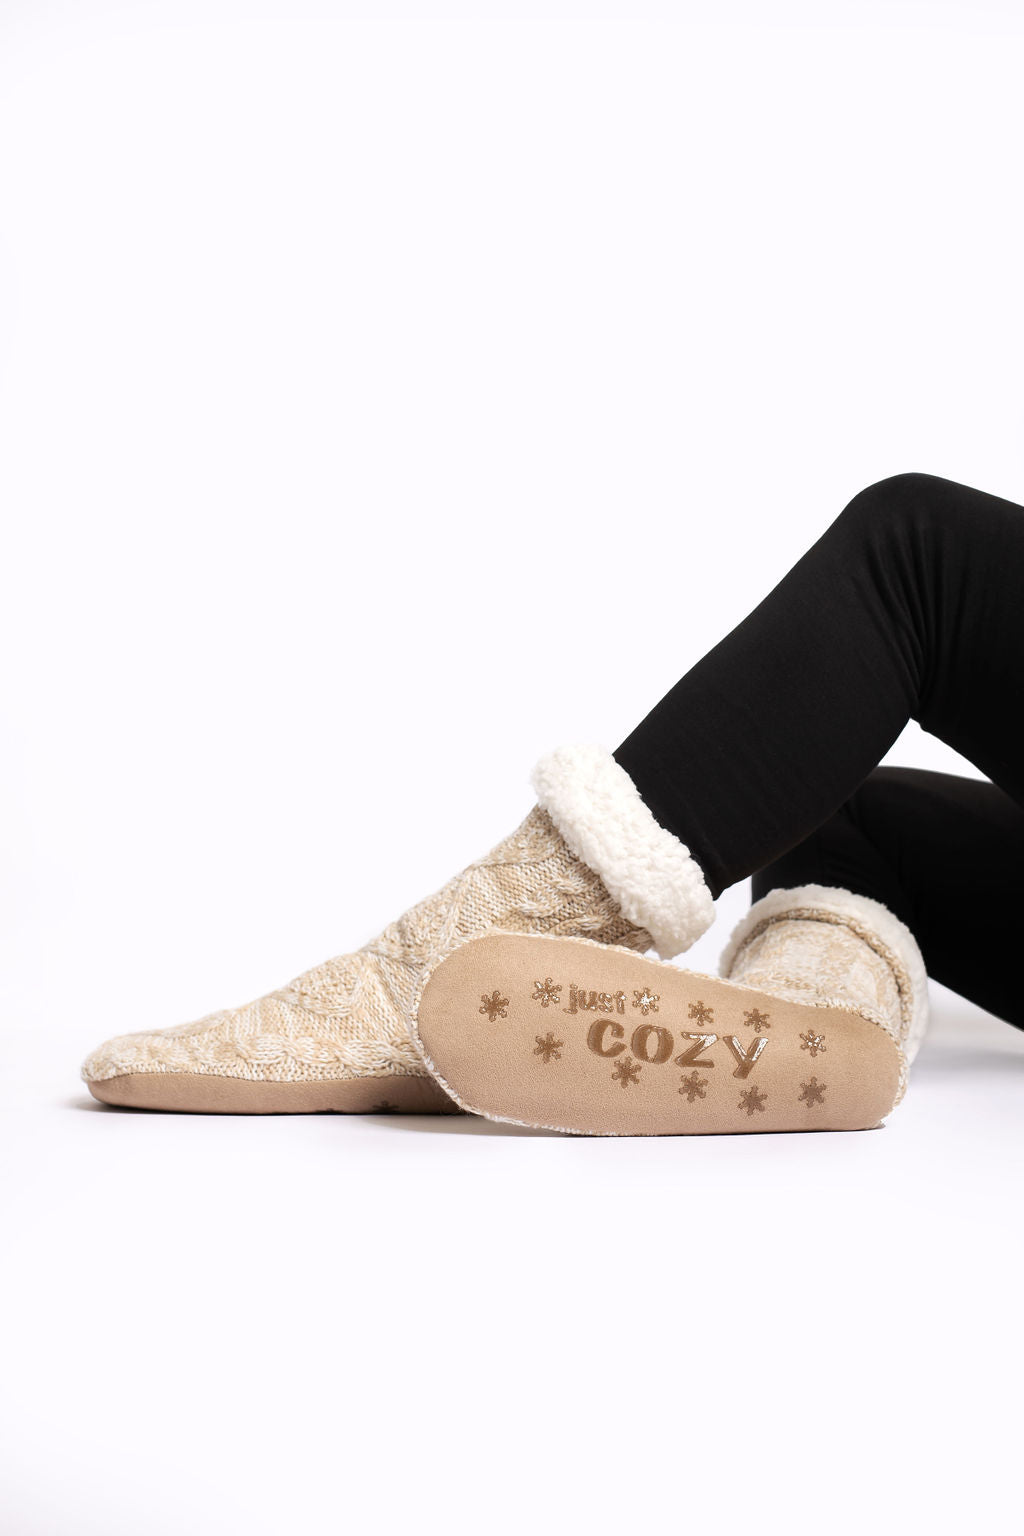 Cozy Winter Happy Face Slippers For Women Funny Socks With Grippers, Non  Slip Knit, And Cute And Warm Perfect Gift Idea From Peiruu, $13.87